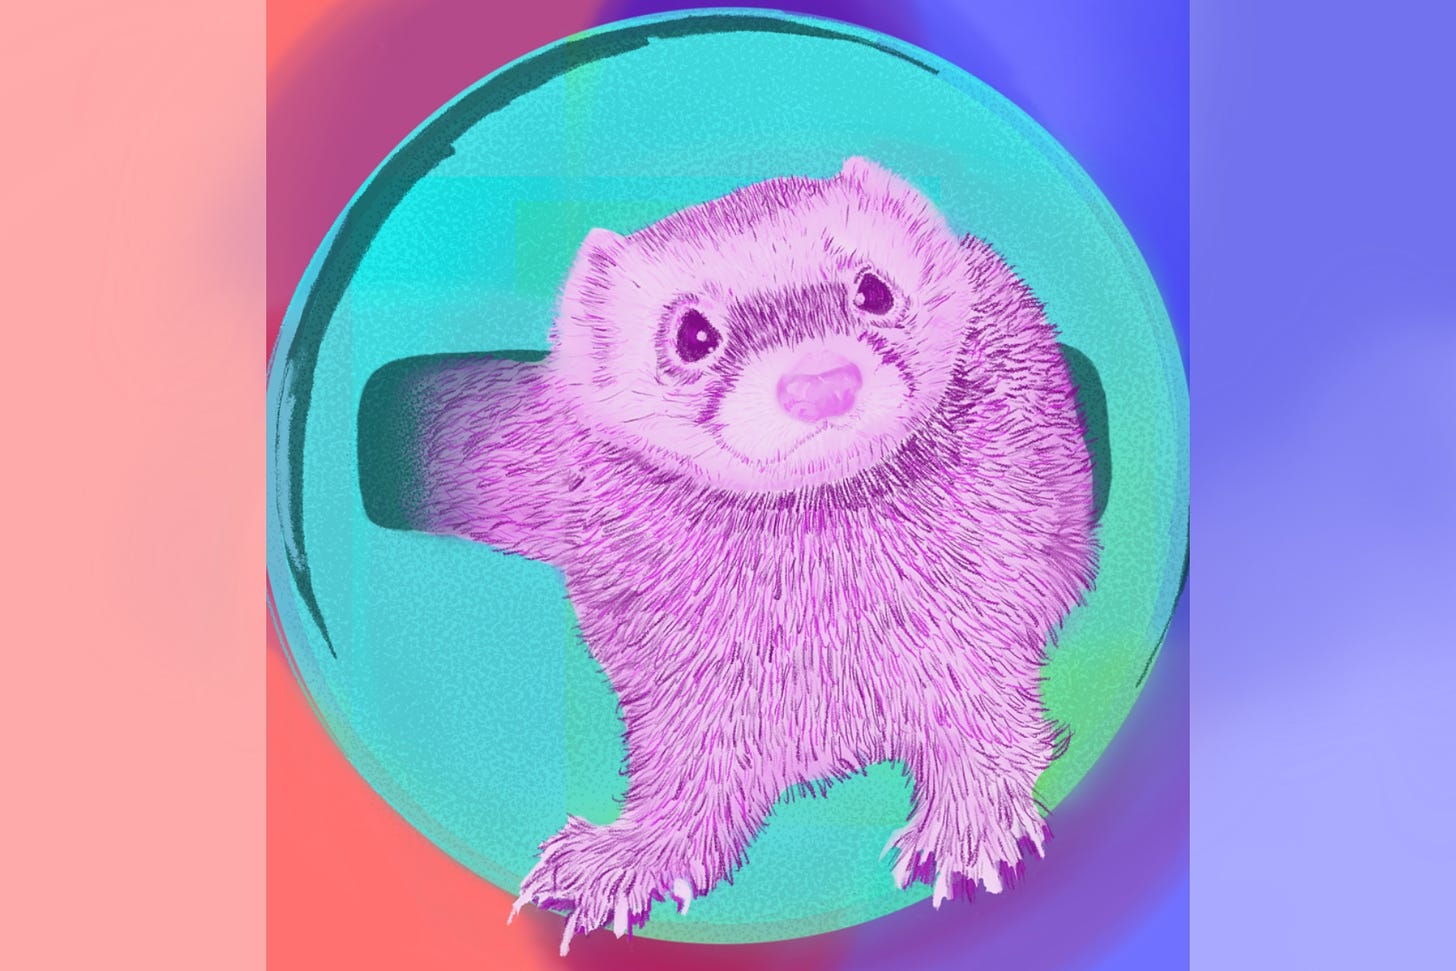 Vivid colored pencil drawing of a fuchsia ferret emerging from the narrow opening of a turquoise-green container. Abstract colored patches in the background are coral and red, lavender and violet.